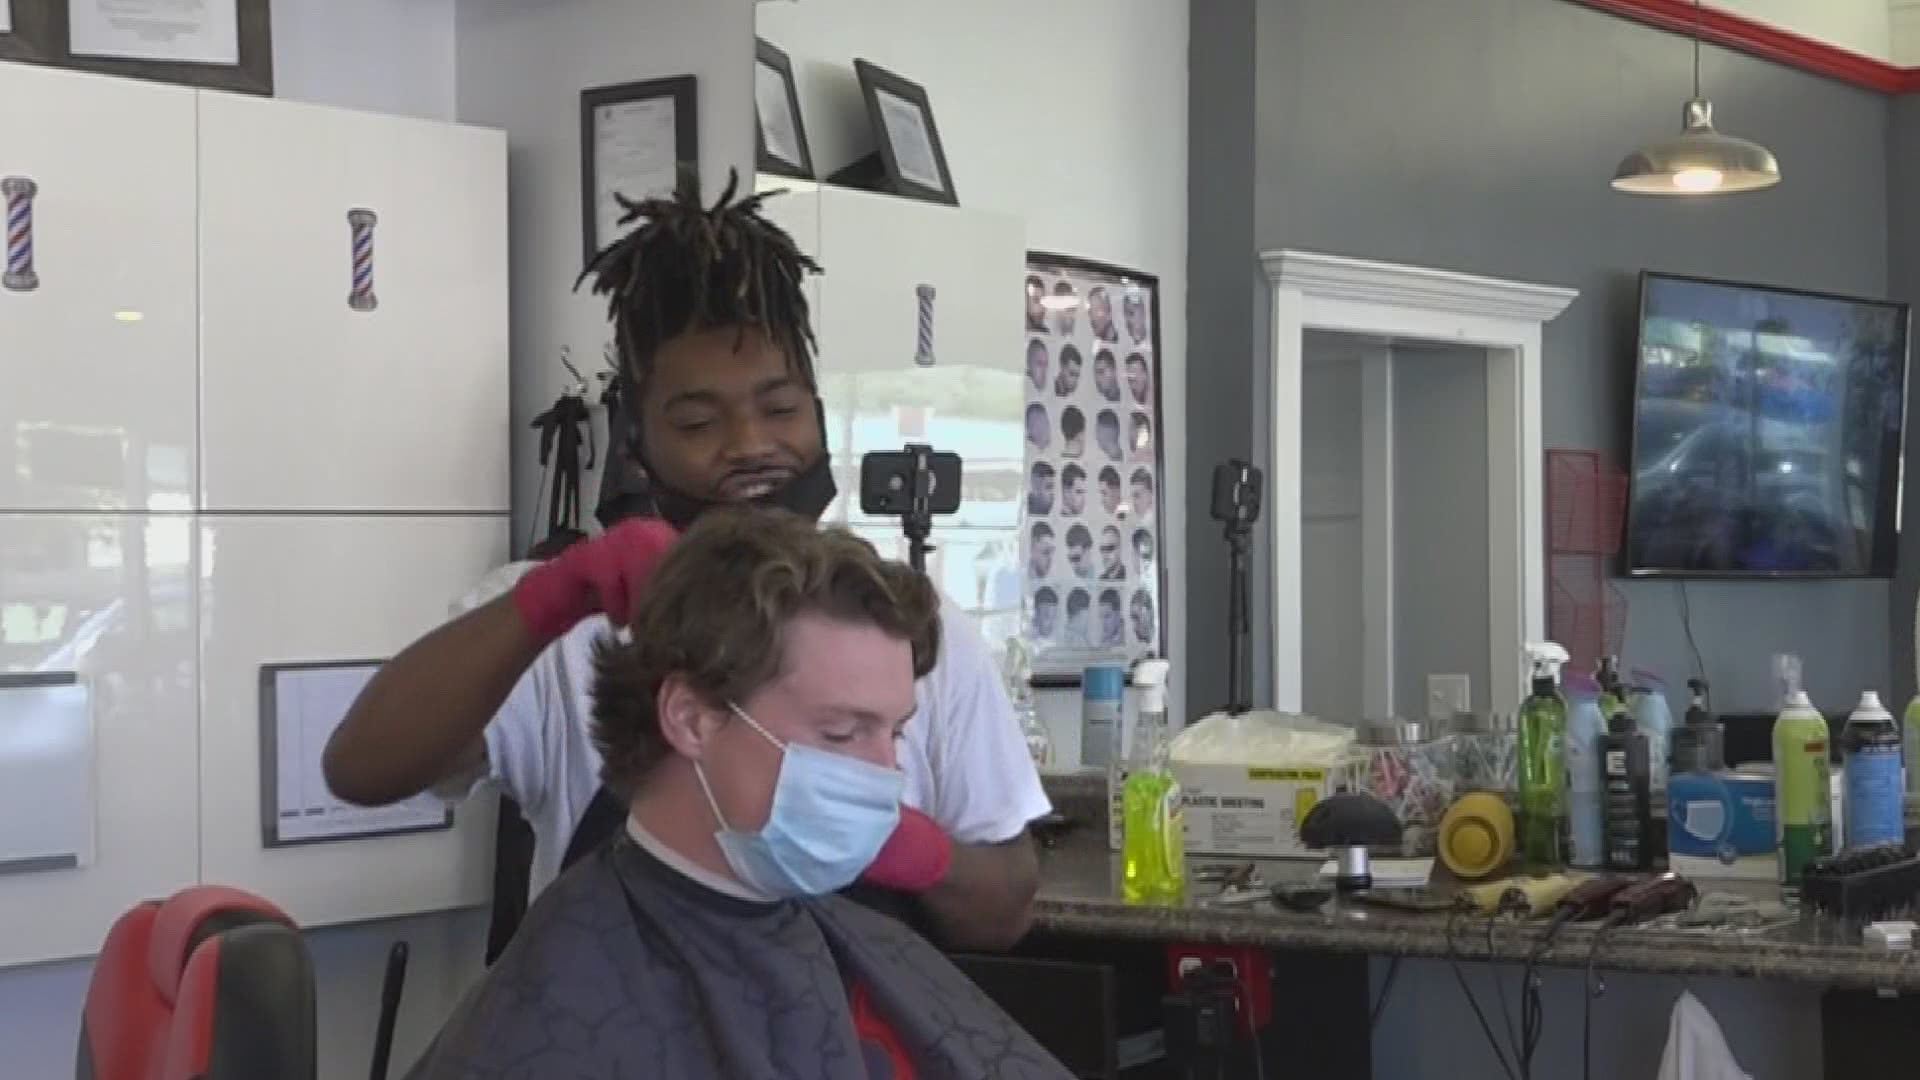 The Bangor based barbershop reopened with strict precautions for both customers and barbers.